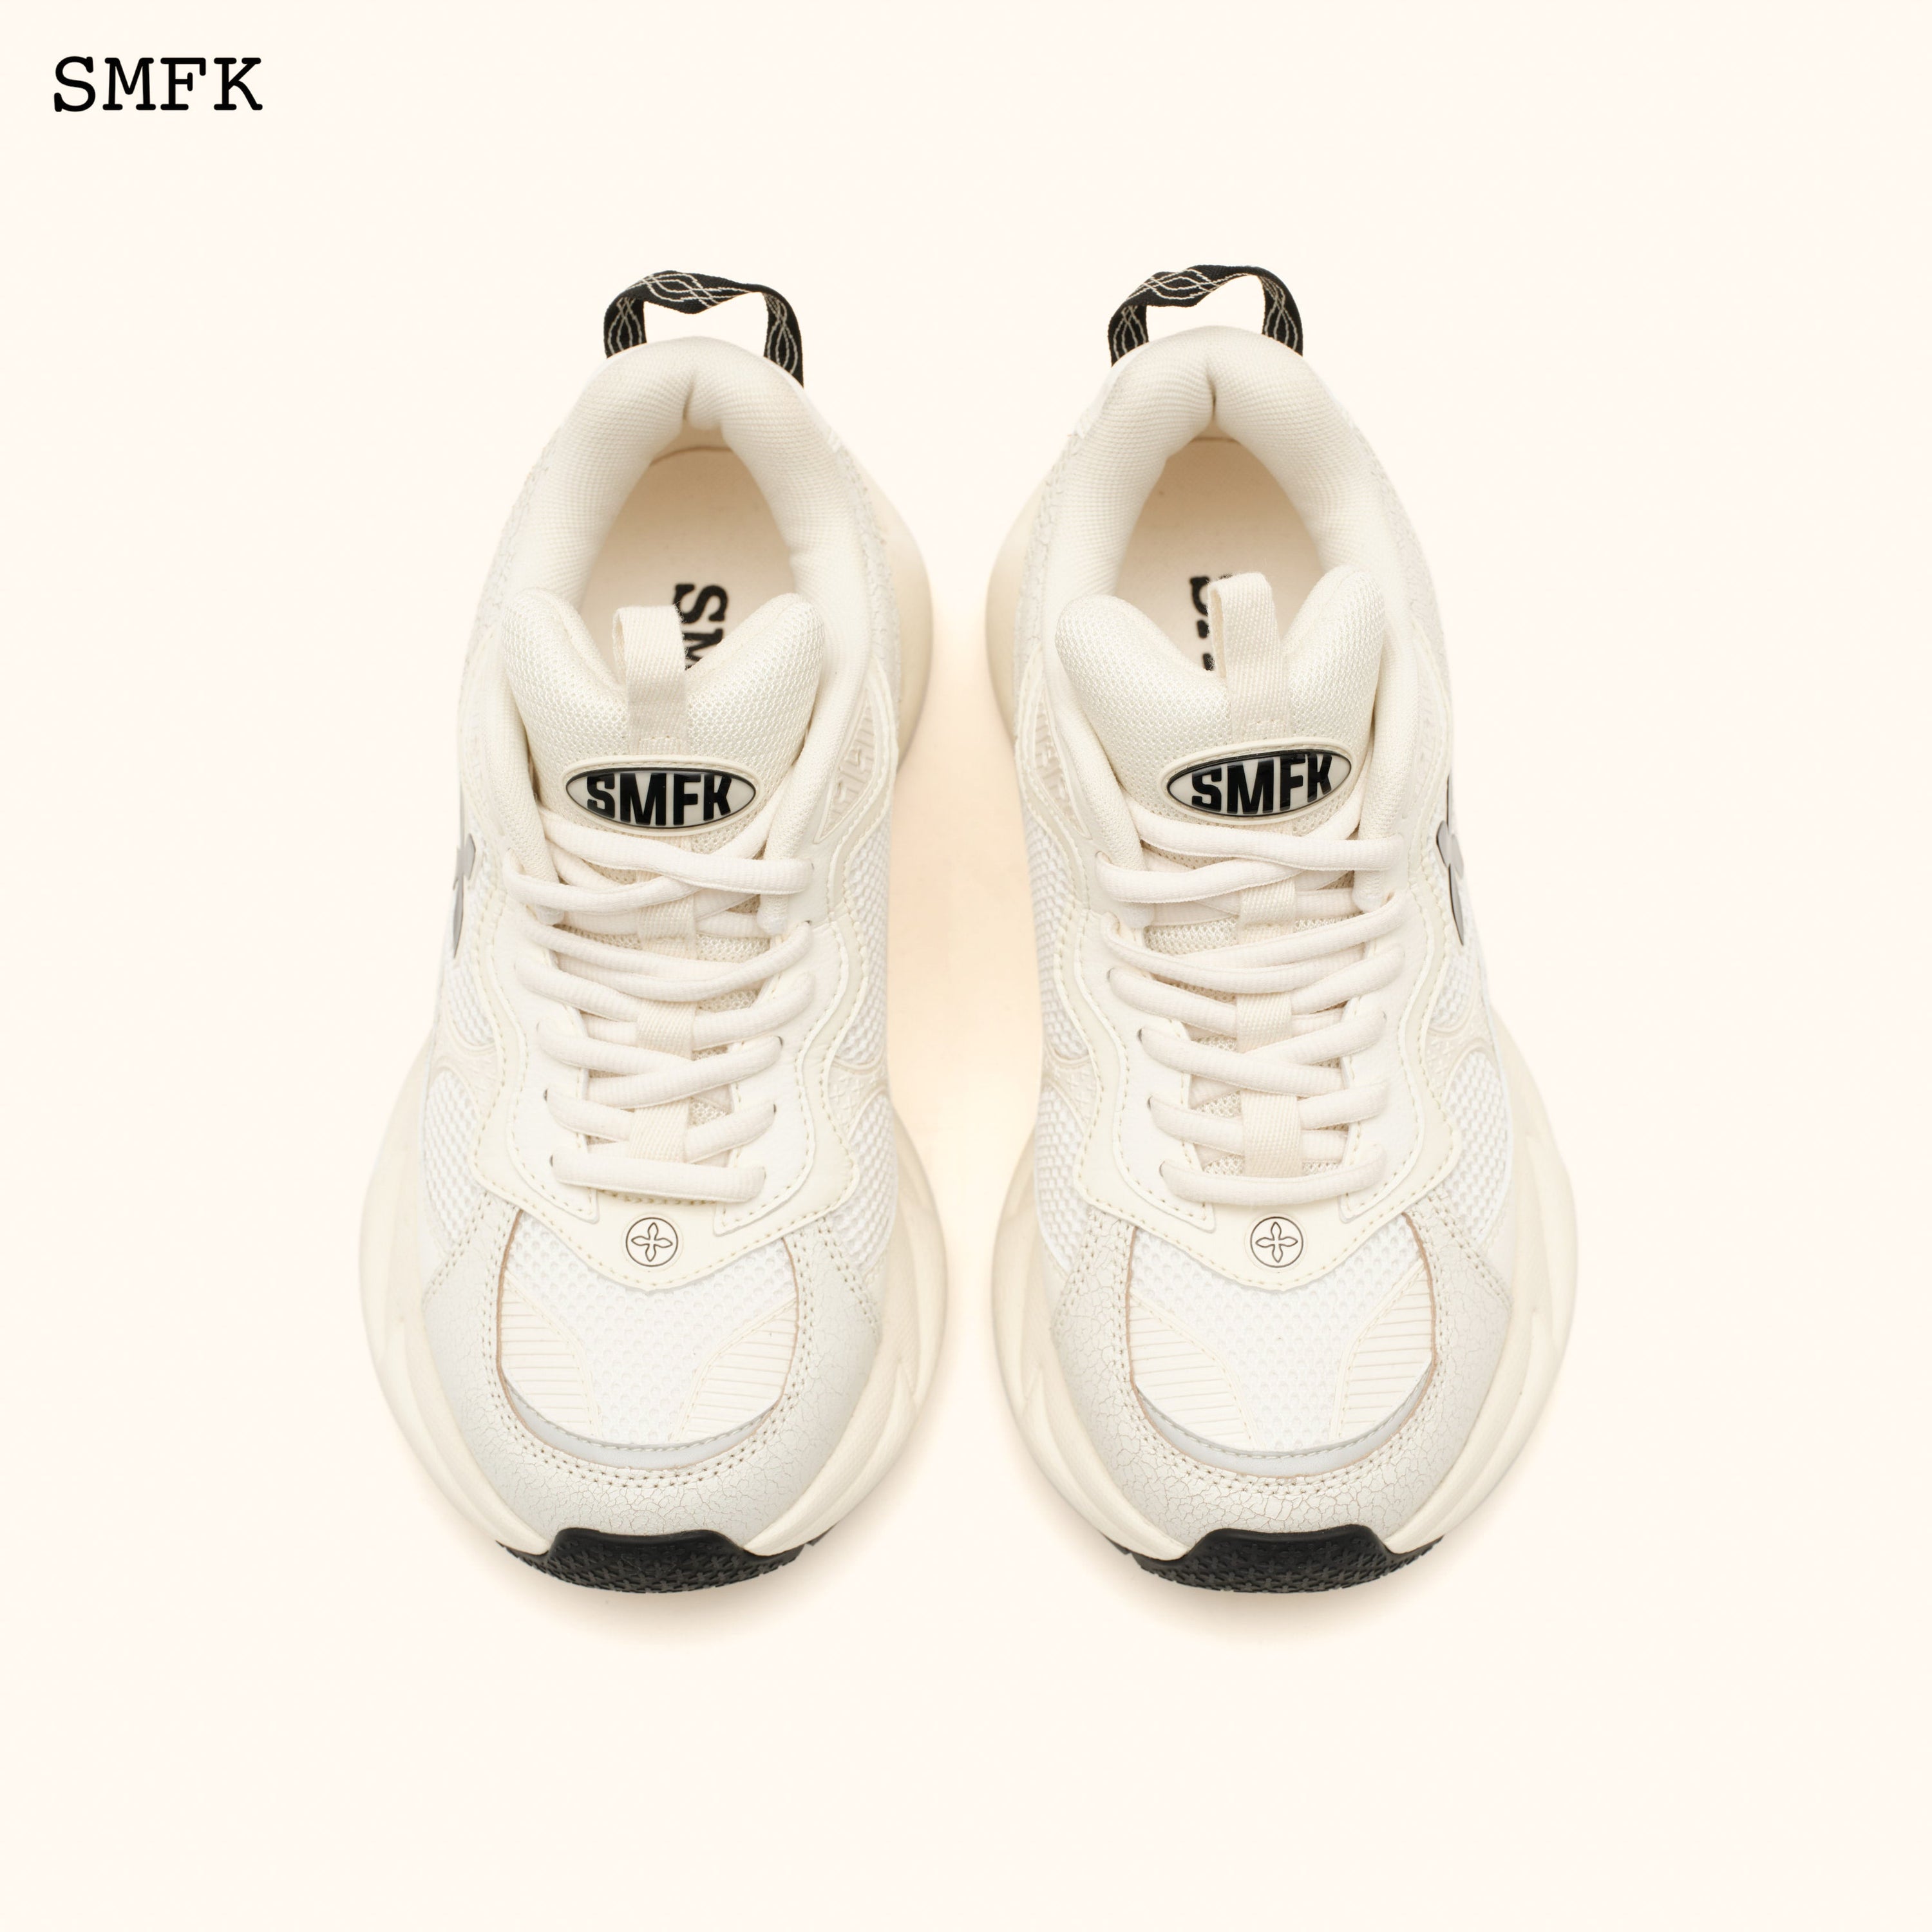 Compass Wave Retro Jogging Shoes In White - SMFK Official